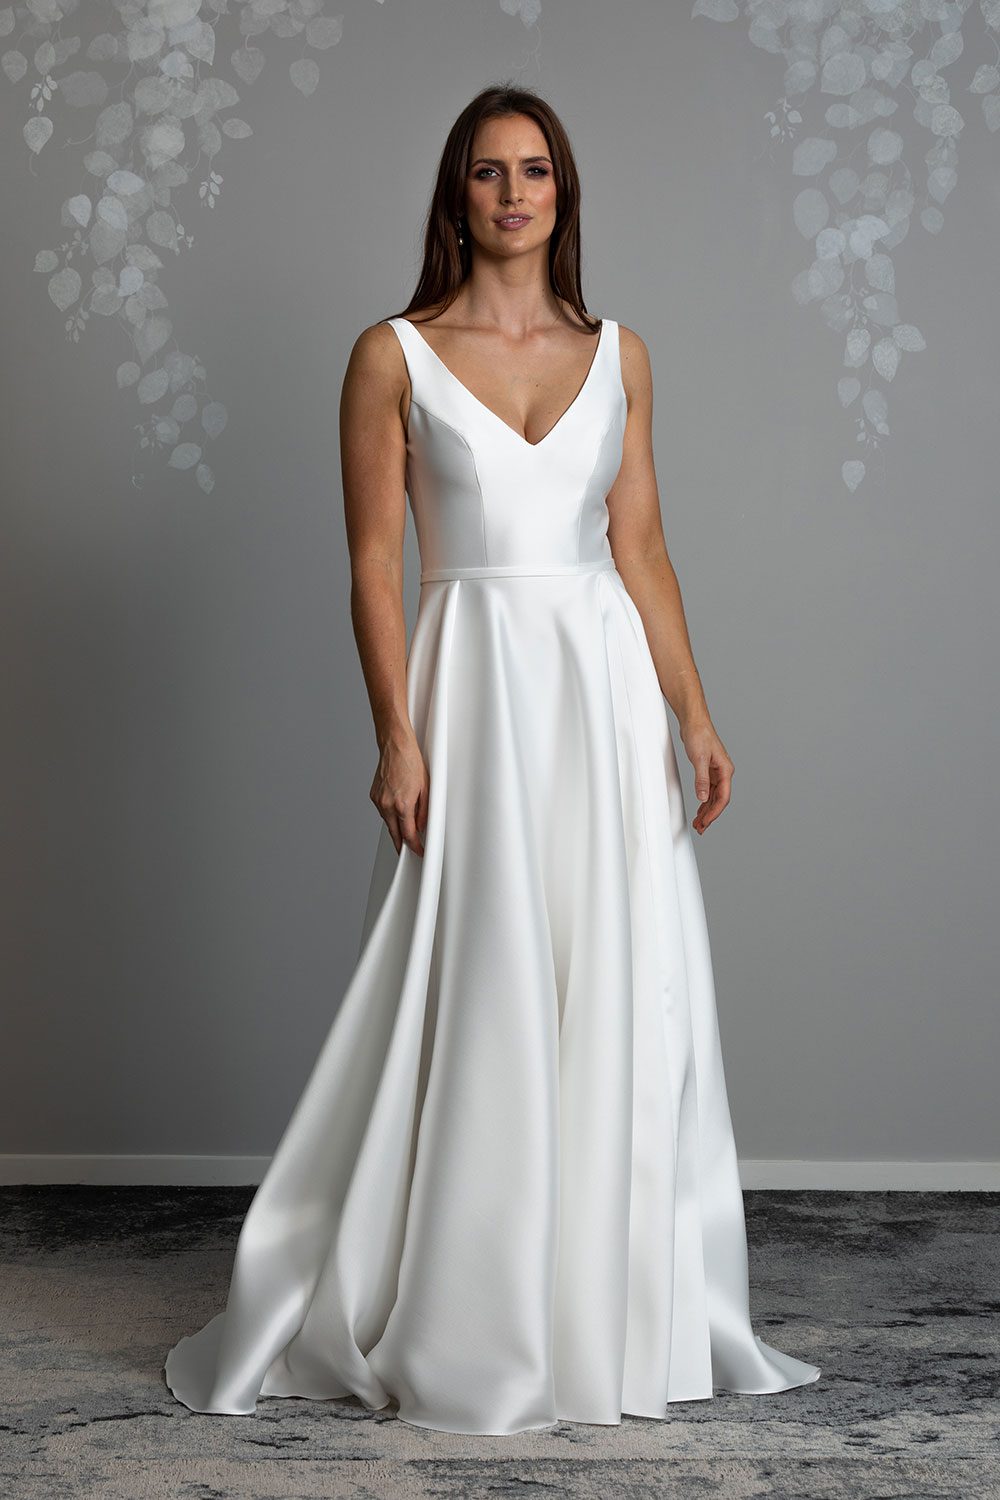 Madison Wedding gown from Vinka Design - This gown is both classic and contemporary, made beautifully with luxurious Mikado satin. The bodice is structured with a deep V-neckline and a squared, low back. Full length view of model with classic and modern dress made of Mikado satin with deep V bodice and irregular folded skirt